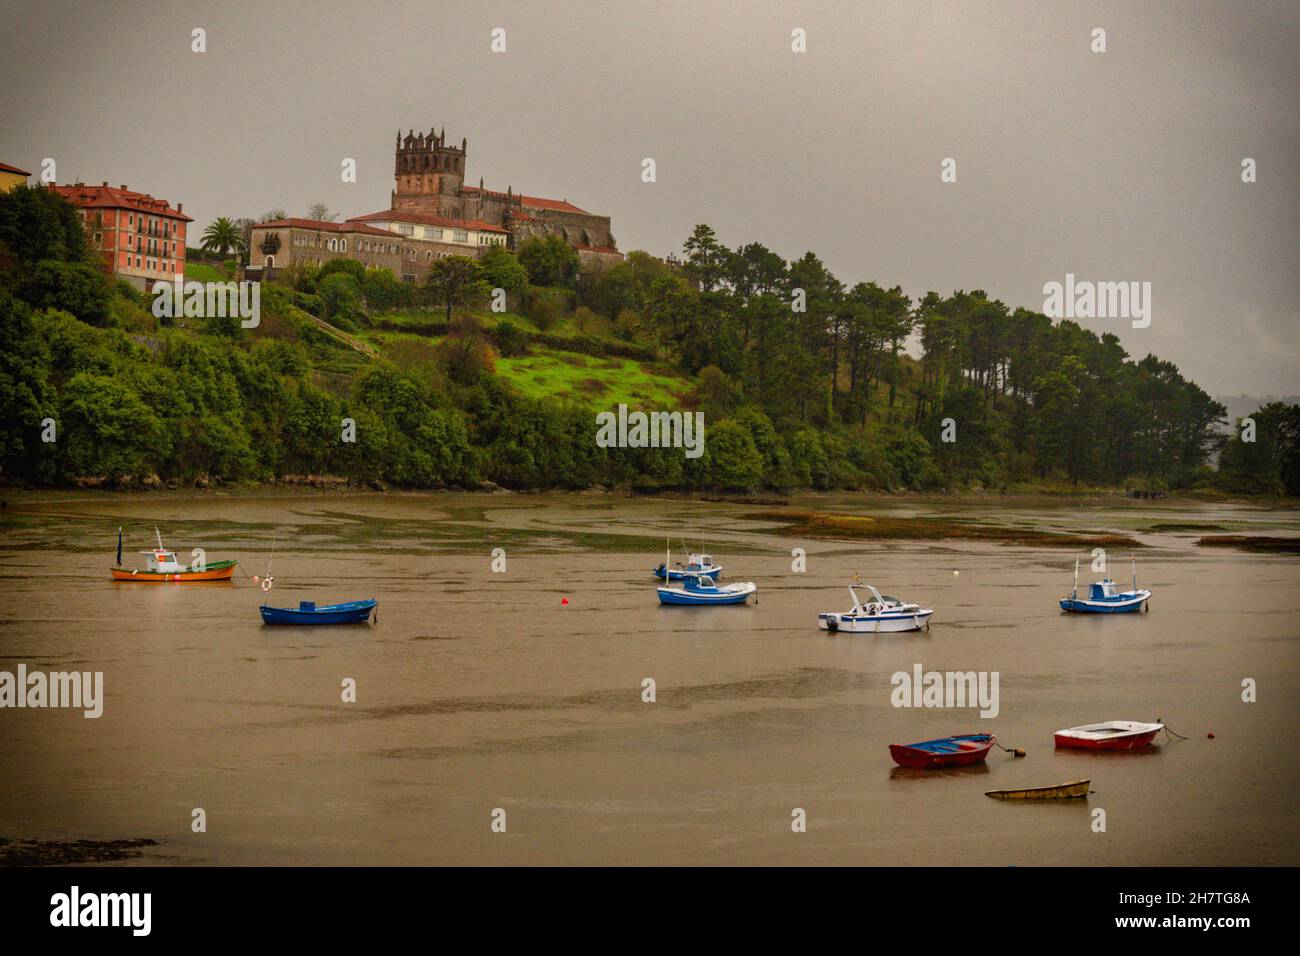 Landscapes and places of the Cantabrian coast. Stock Photo